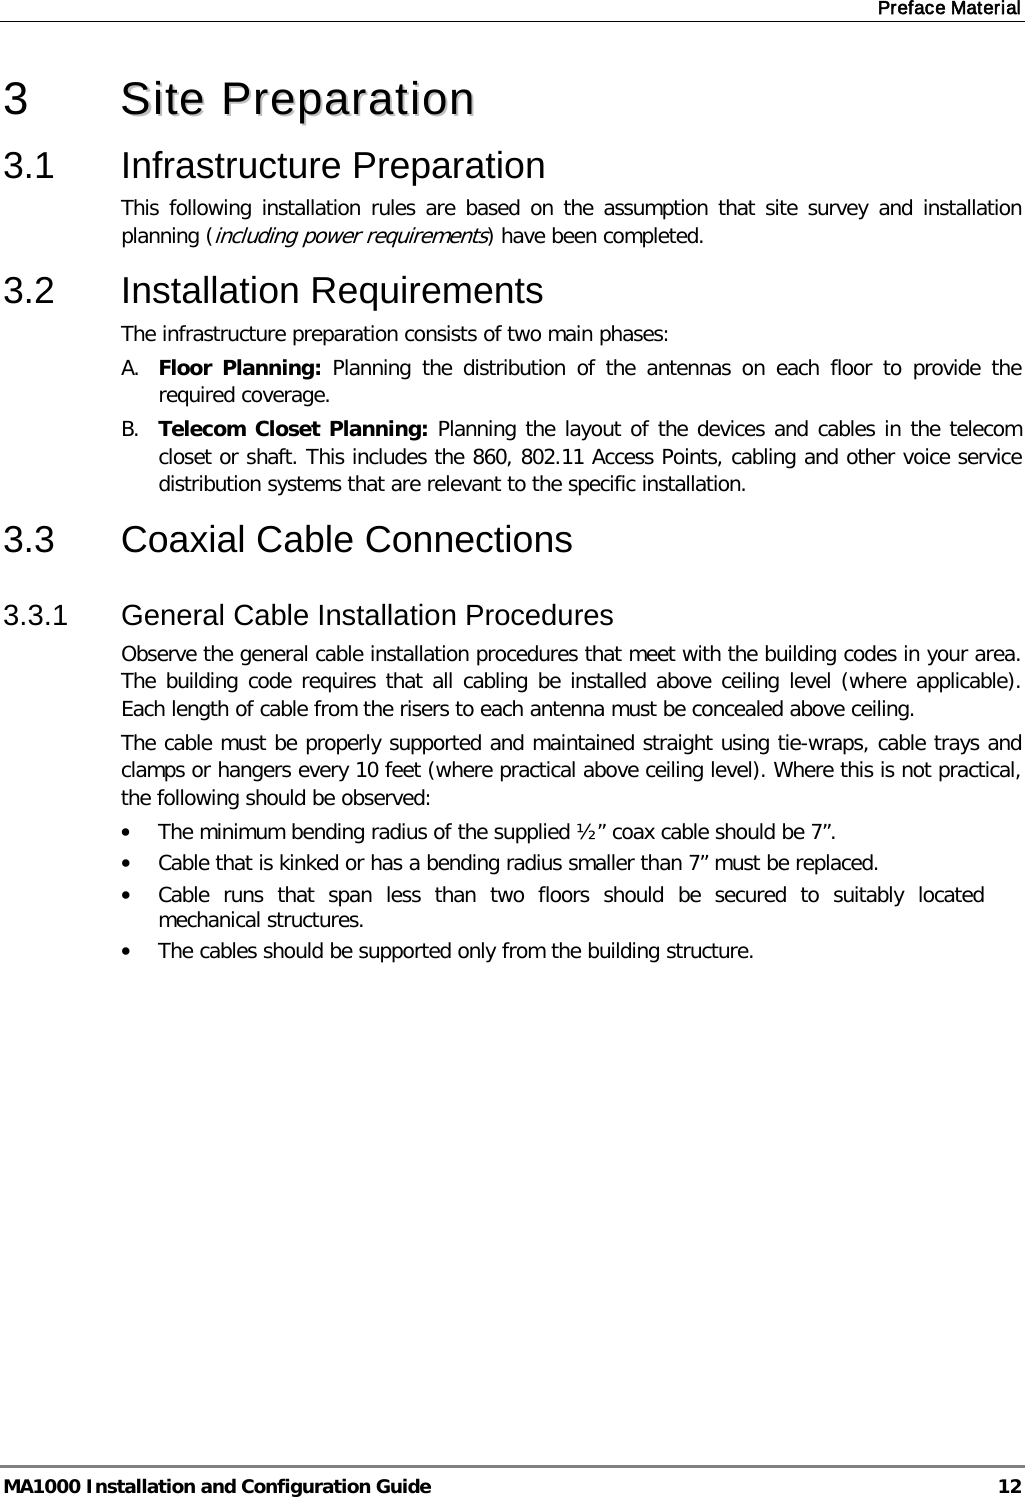 Preface Material  MA1000 Installation and Configuration Guide  12 3  SSiittee  PPrreeppaarraattiioonn    3.1  Infrastructure Preparation This following installation rules are based on the assumption that site survey and installation planning (including power requirements) have been completed.  3.2  Installation Requirements The infrastructure preparation consists of two main phases: A. Floor Planning: Planning the distribution of the antennas on each floor to provide the required coverage.  B. Telecom Closet Planning: Planning the layout of the devices and cables in the telecom closet or shaft. This includes the 860, 802.11 Access Points, cabling and other voice service distribution systems that are relevant to the specific installation. 3.3  Coaxial Cable Connections 3.3.1  General Cable Installation Procedures Observe the general cable installation procedures that meet with the building codes in your area. The building code requires that all cabling be installed above ceiling level (where applicable). Each length of cable from the risers to each antenna must be concealed above ceiling.  The cable must be properly supported and maintained straight using tie-wraps, cable trays and clamps or hangers every 10 feet (where practical above ceiling level). Where this is not practical, the following should be observed: • The minimum bending radius of the supplied ½” coax cable should be 7”. • Cable that is kinked or has a bending radius smaller than 7” must be replaced. • Cable runs that span less than two floors should be secured to suitably located mechanical structures. • The cables should be supported only from the building structure.    